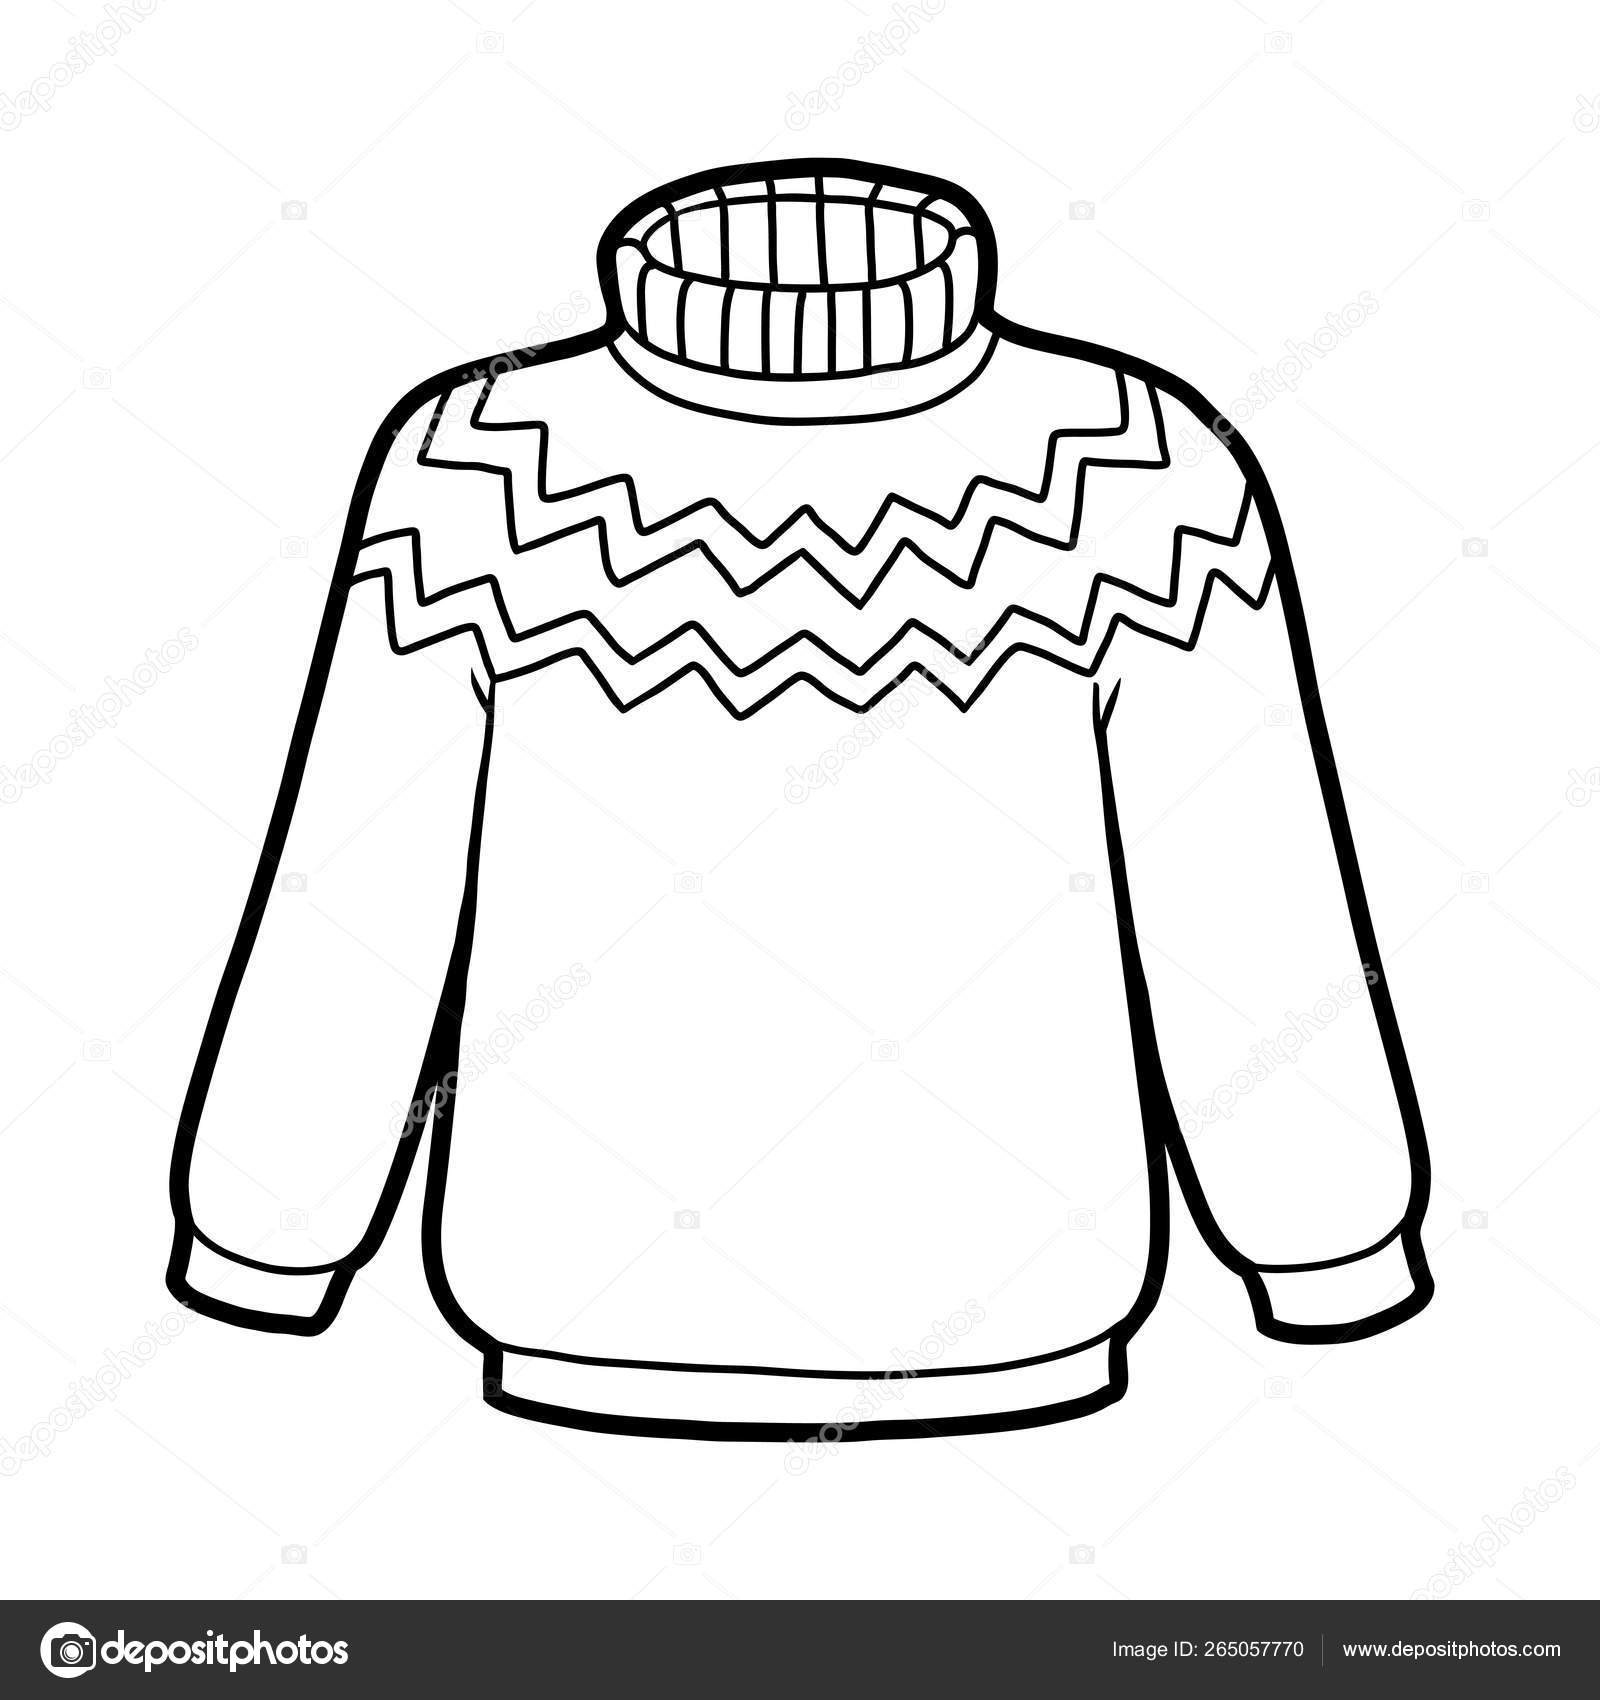 sweater-printable-printable-word-searches